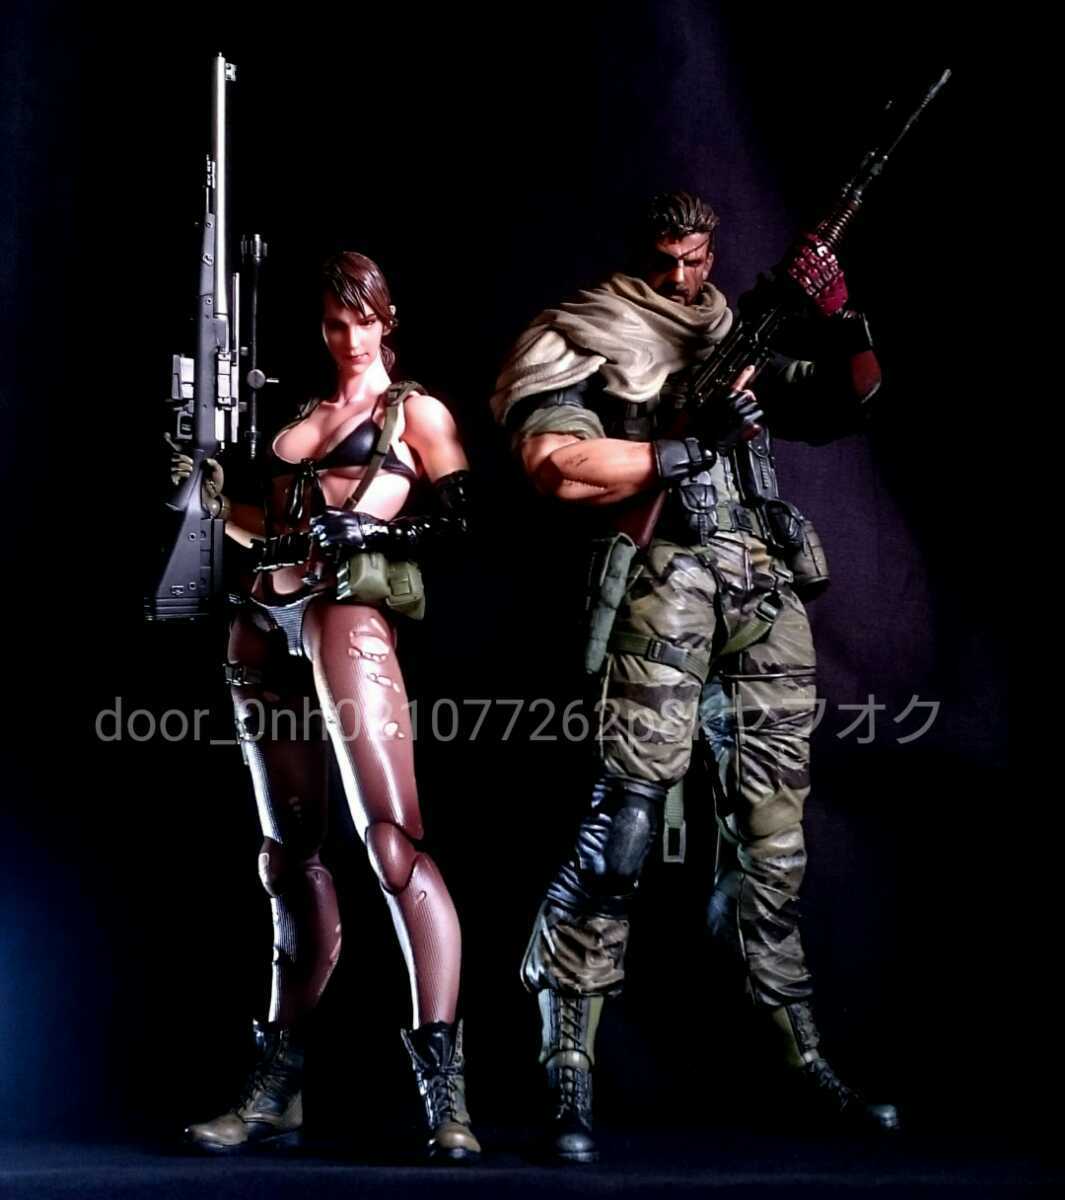 Mgsv Metal Gear Solid Phantom Pain Snake Quiet メタルギアソリッドv スネーク クワイエット アクションフィギュア 正規品 Product Details Yahoo Auctions Japan Proxy Bidding And Shopping Service From Japan